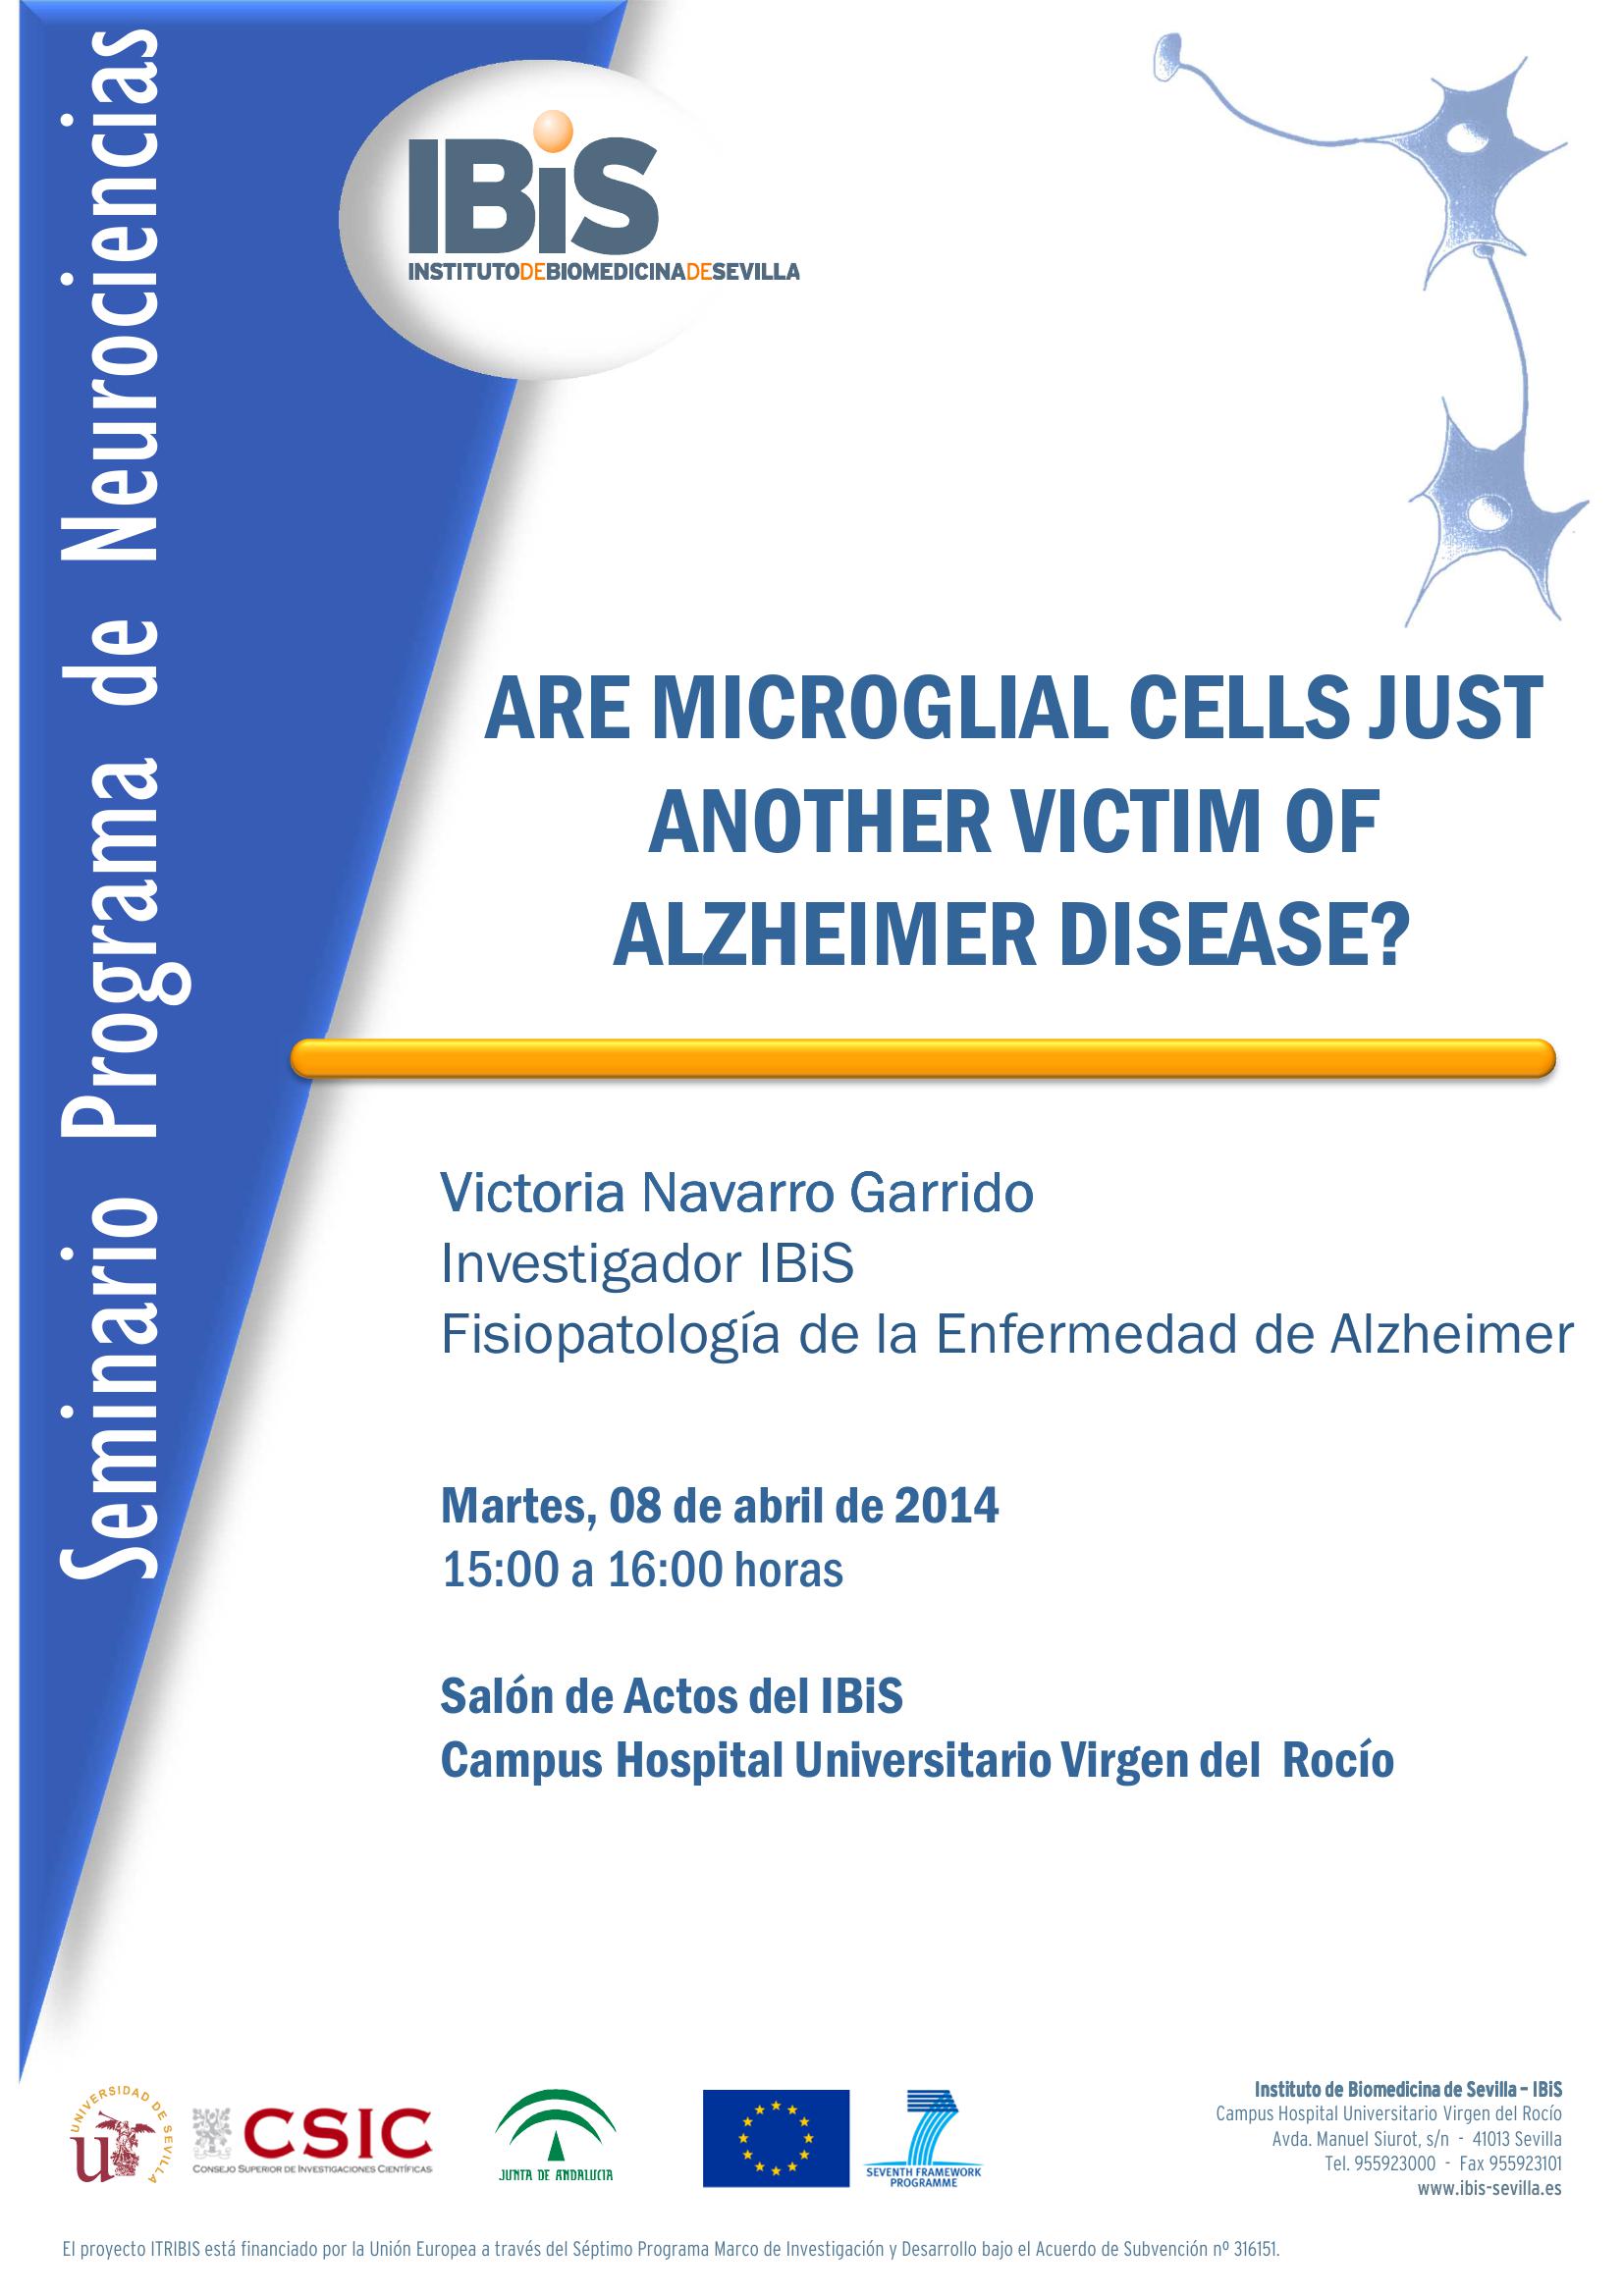 Poster: ARE MICROGLIAL CELLS JUST ANOTHER VICTIM OF ALZHEIMER DISEASE?